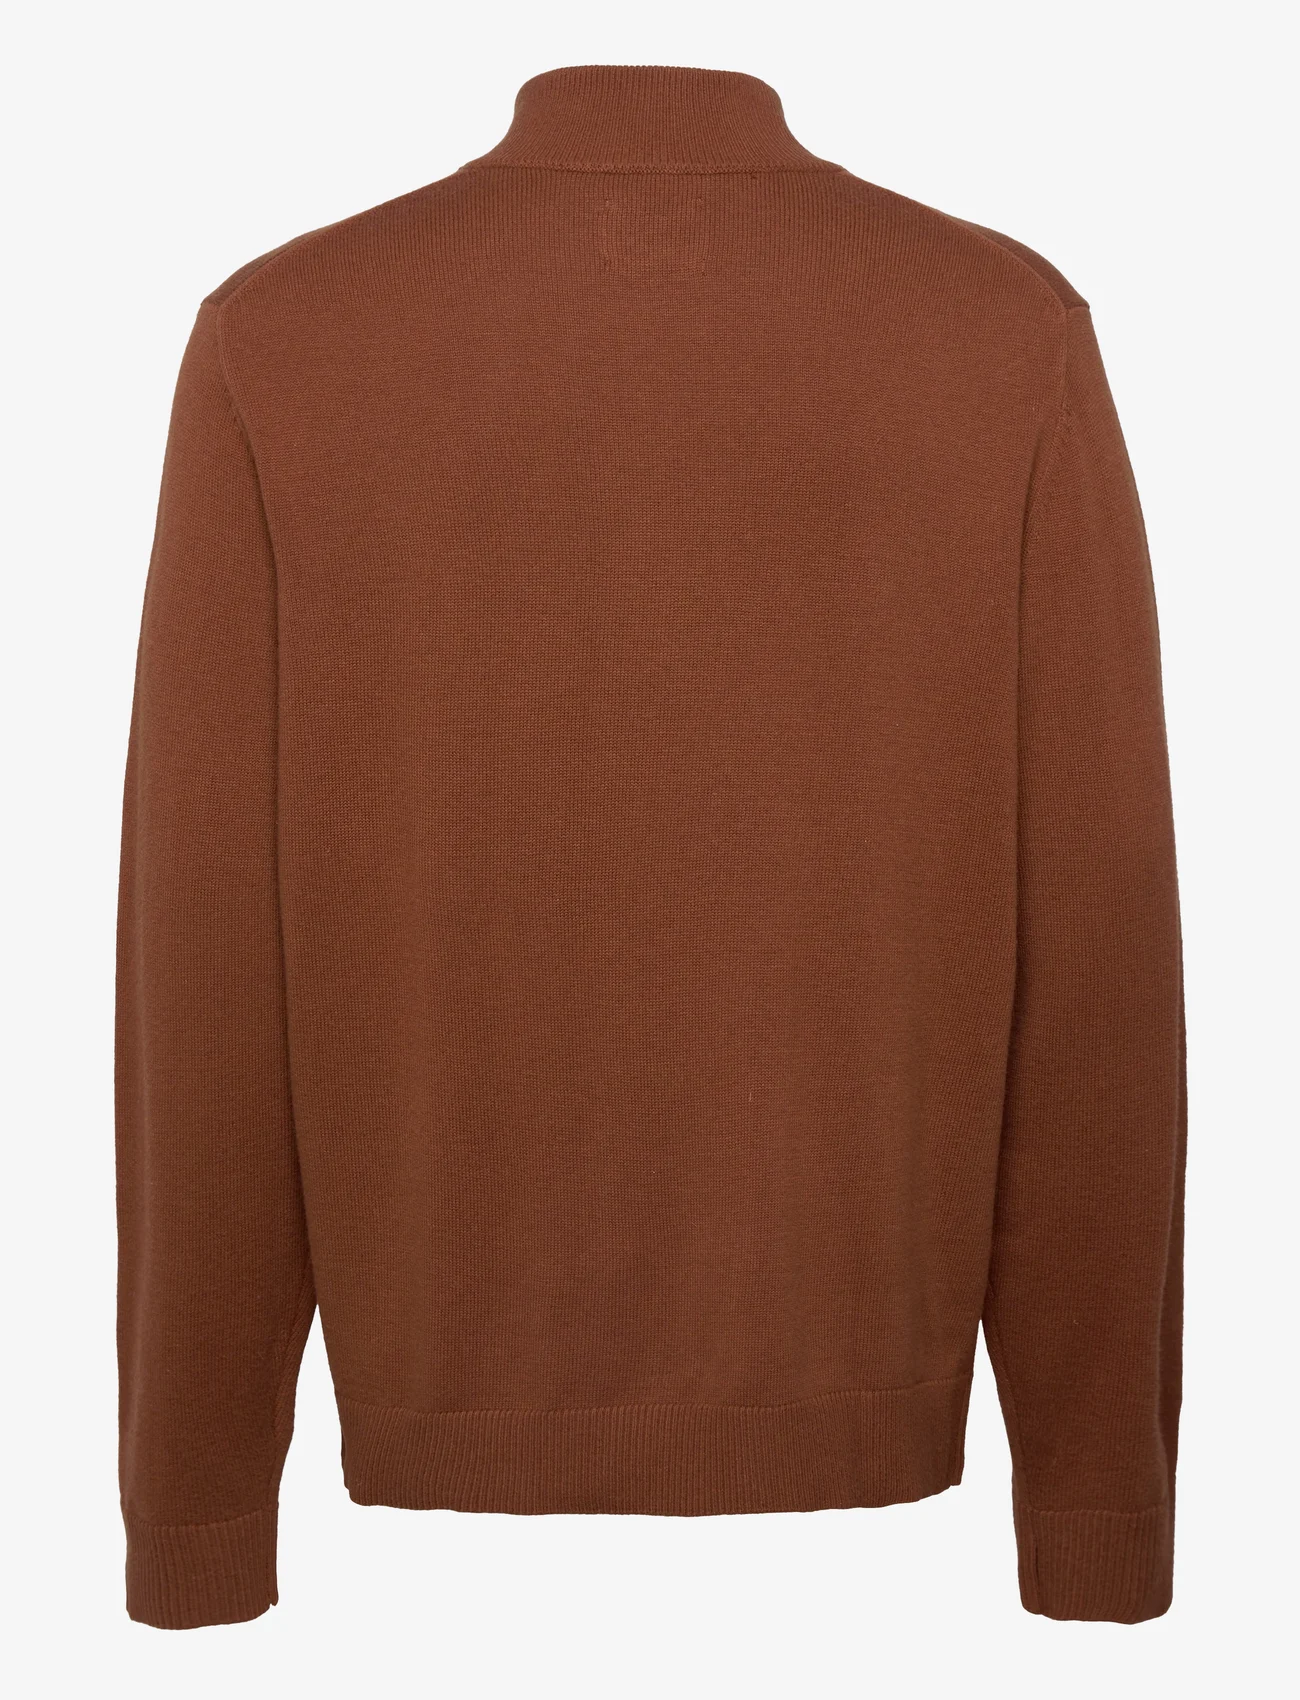 Abercrombie & Fitch - ANF MENS SWEATERS - basic knitwear - brown - 1